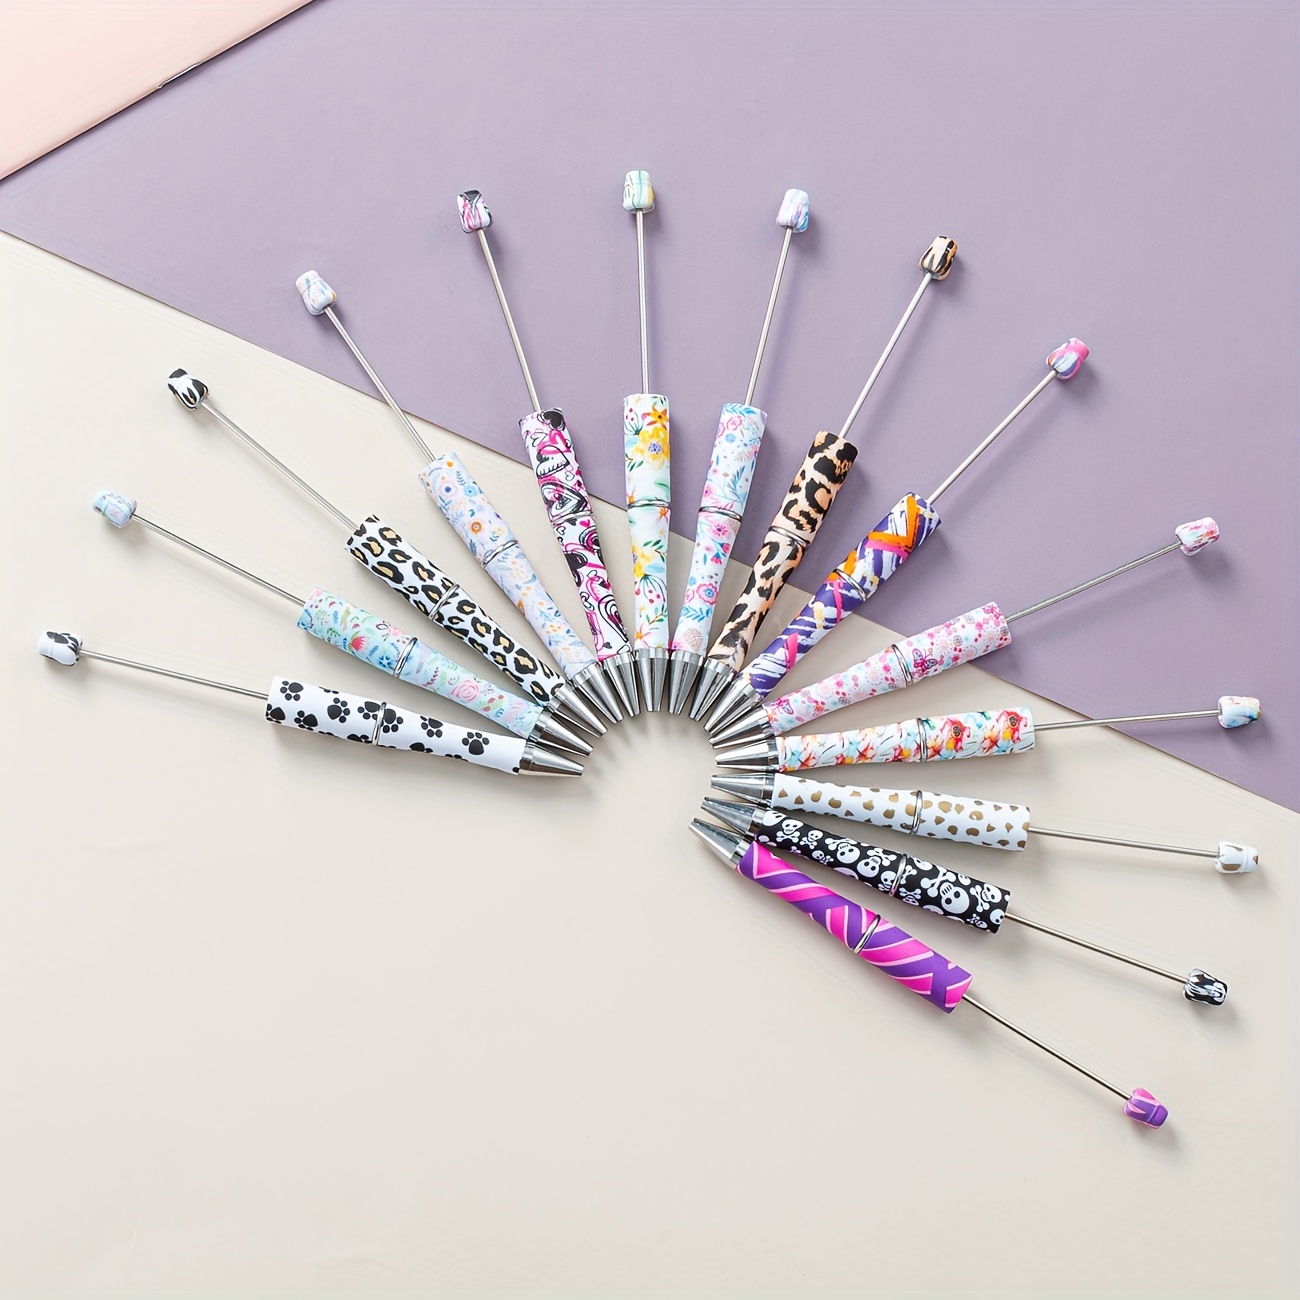 Wholesale Creative Beaded Pen Set Customizable Lampwork Writing Tool With B Perler  Bead Pen Design Ideal For DIY Projects And Creative Projects  USA  Japen From Giftstore888, $0.28